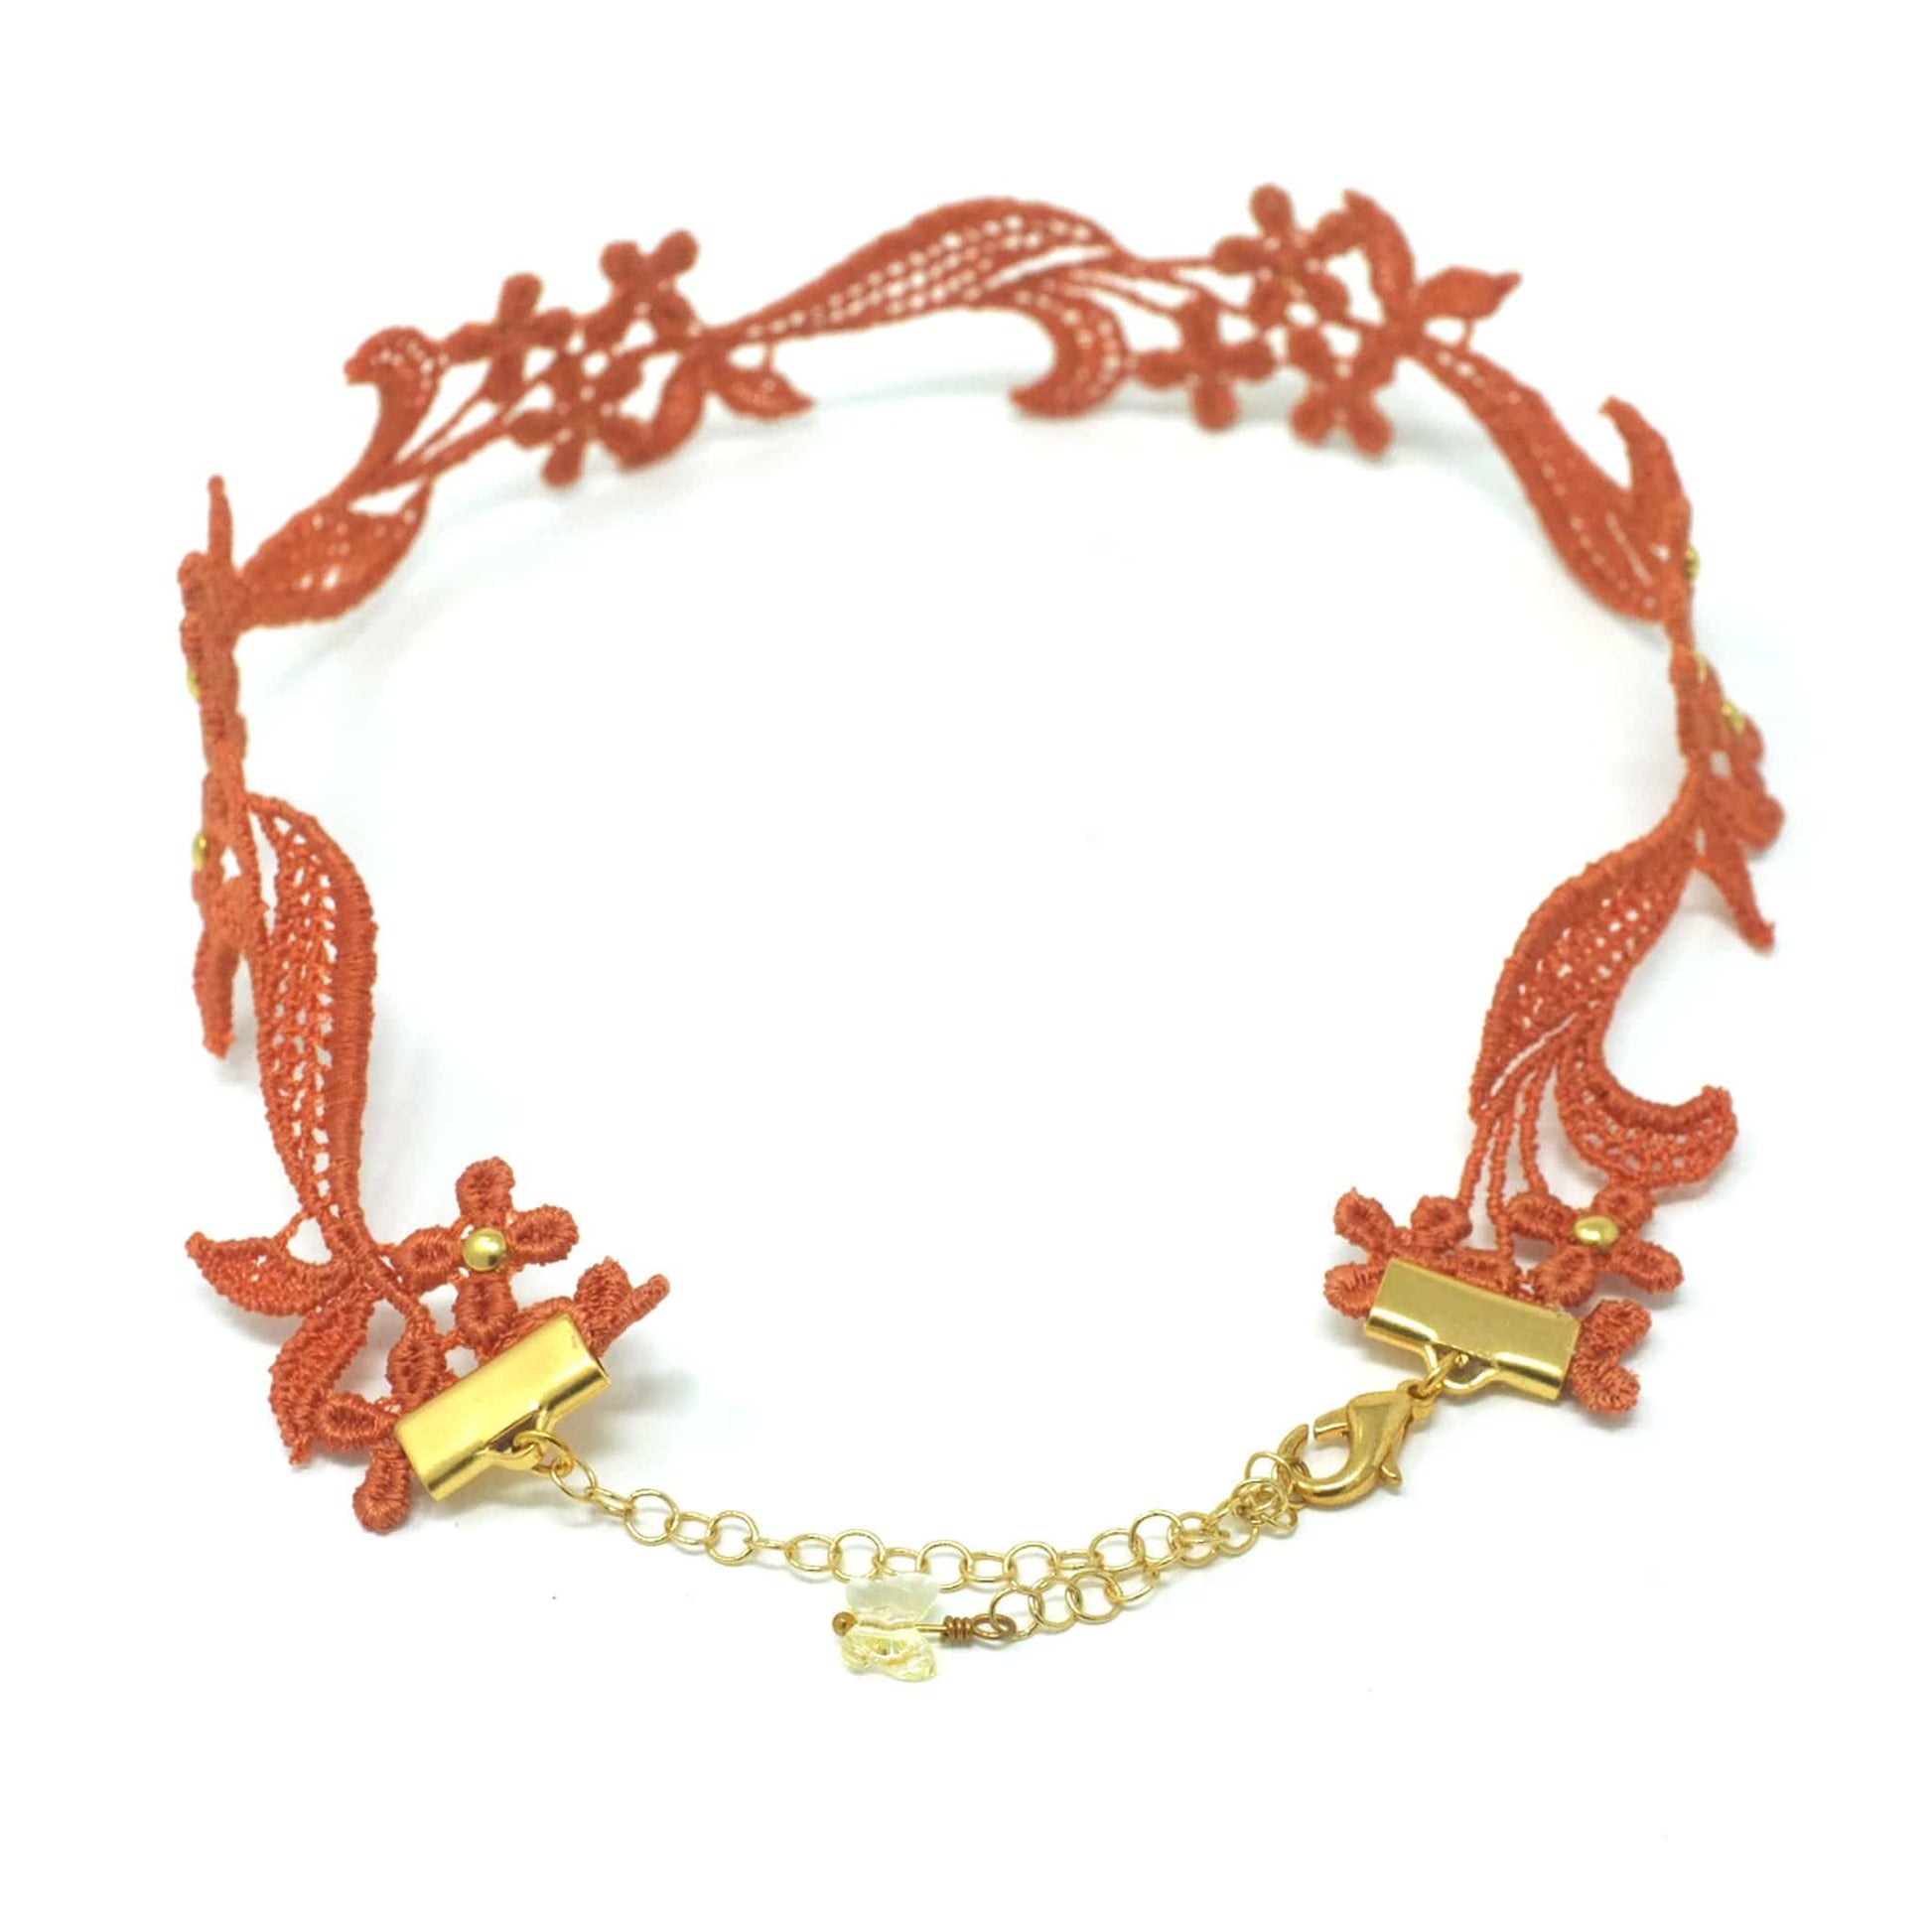 Gold Studded Lace Necklace made with yellow orange lace with floral design